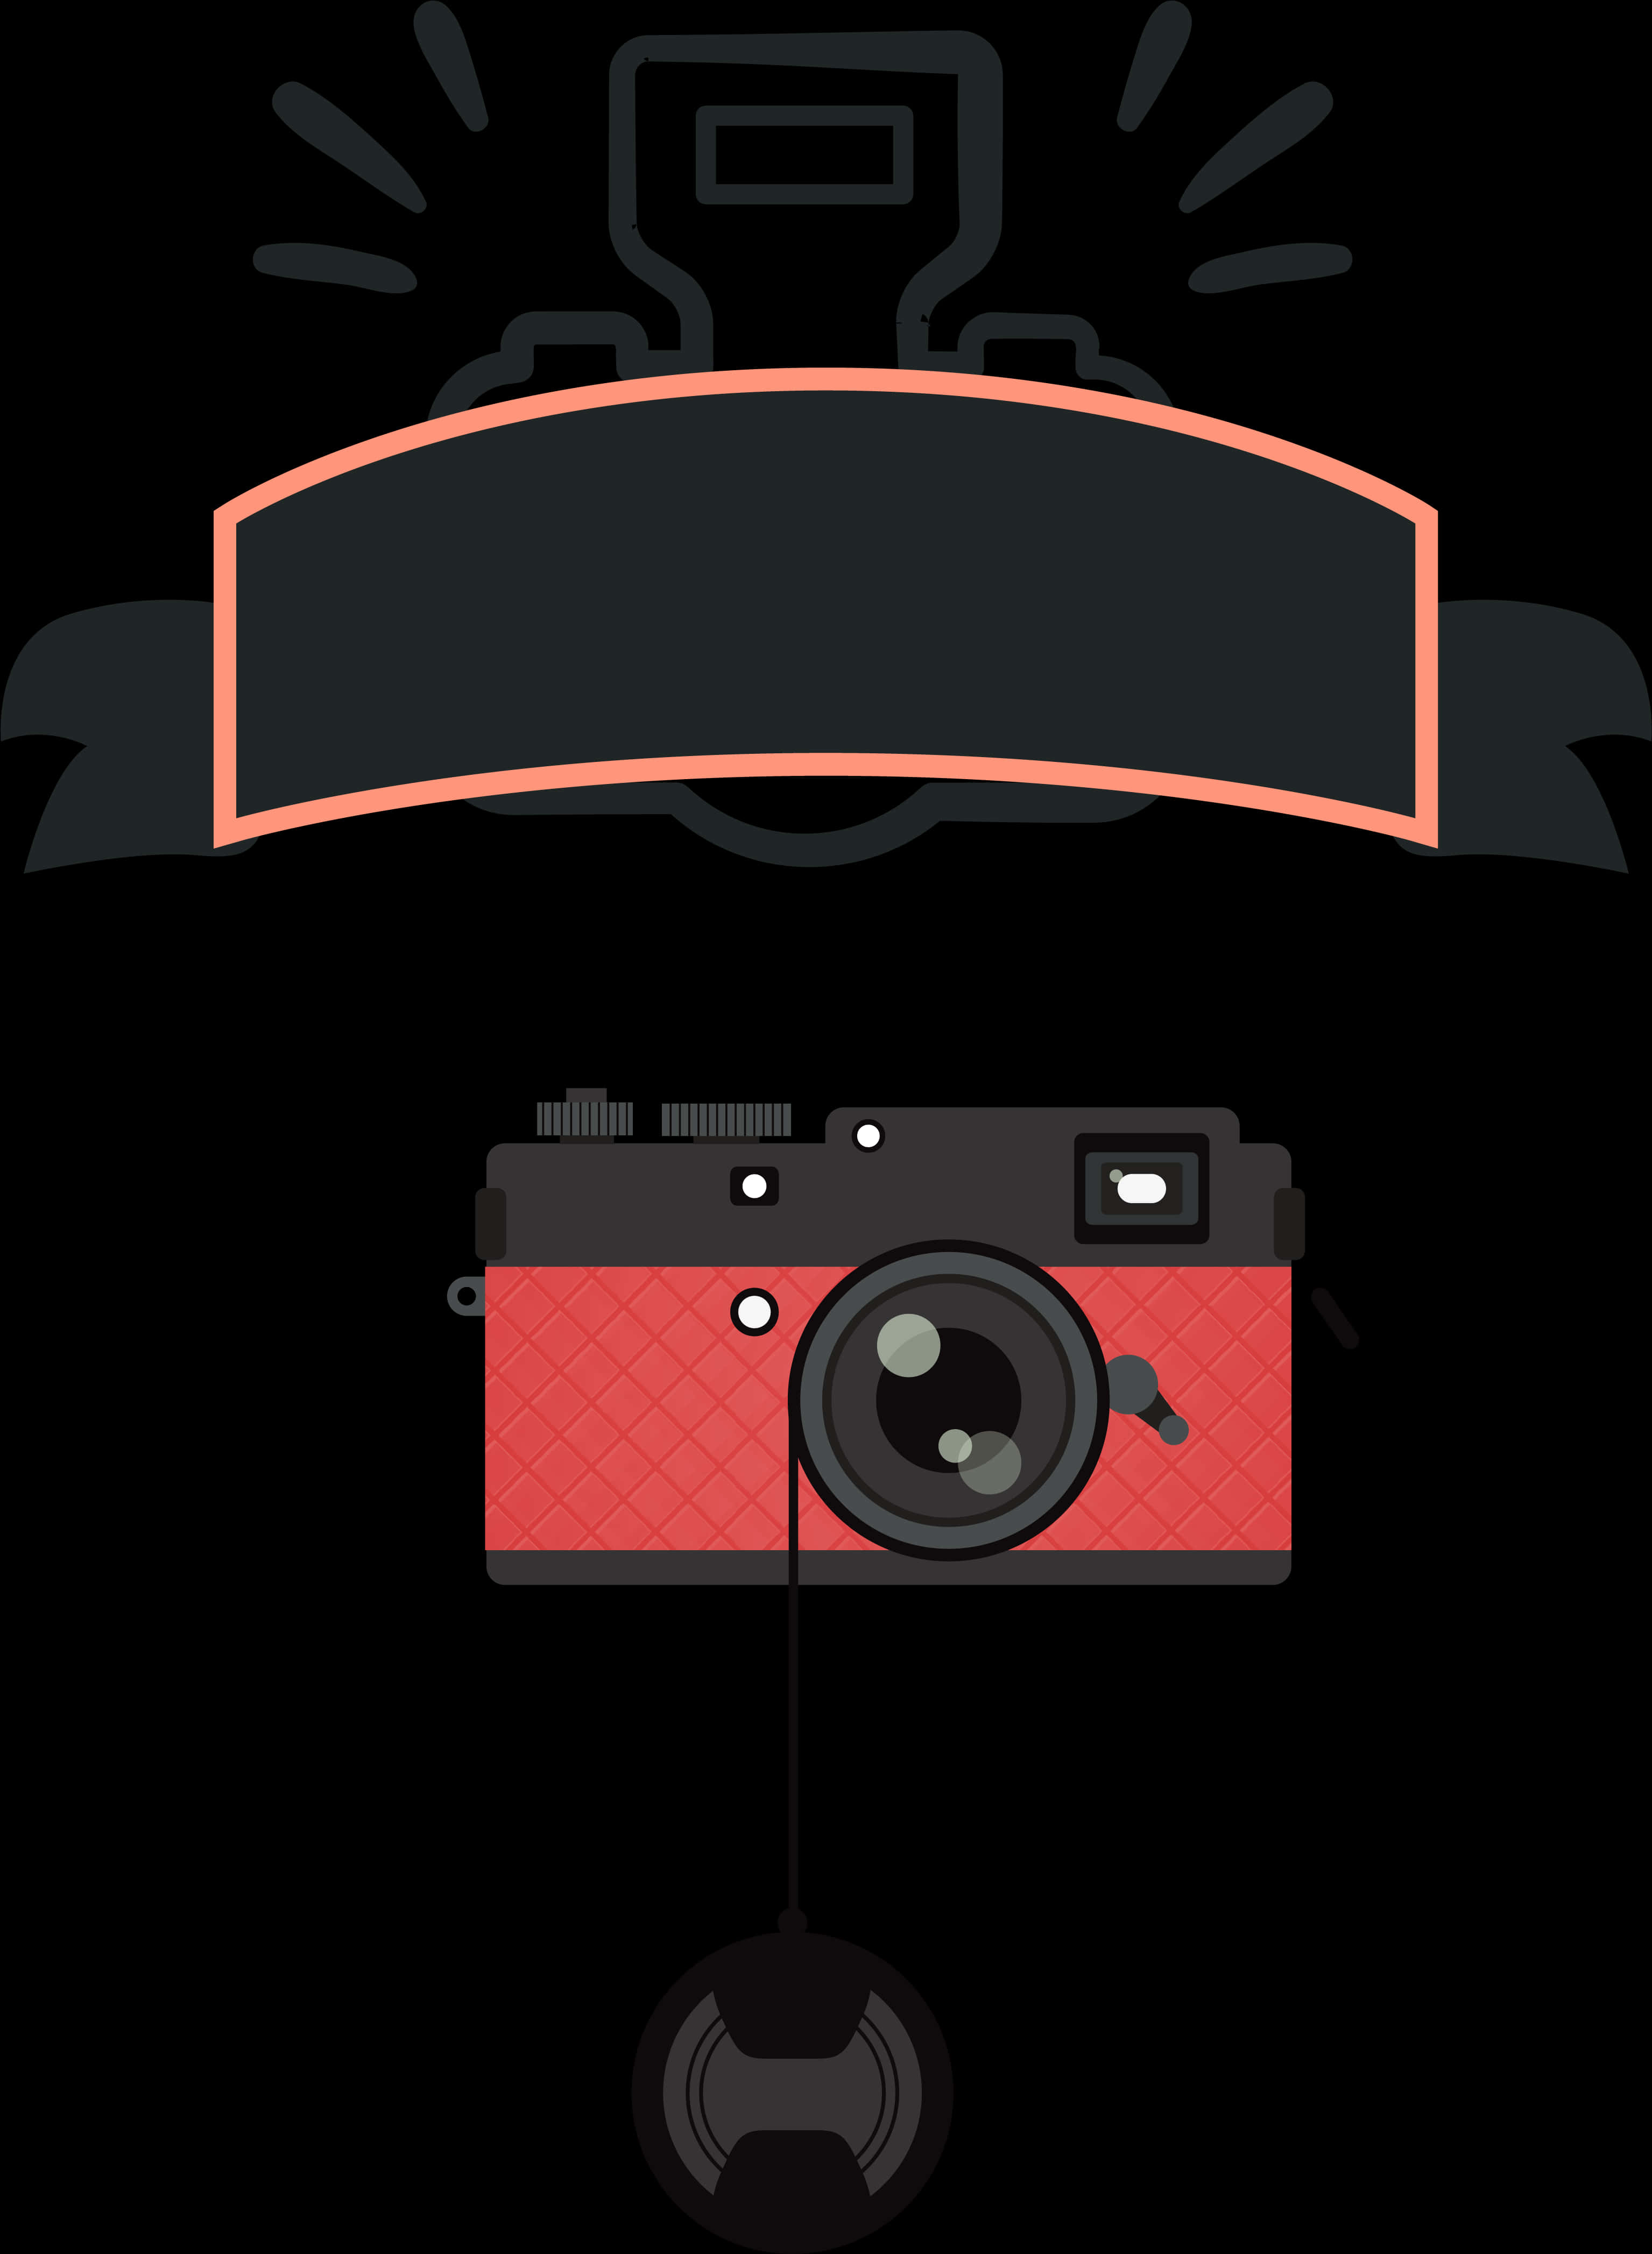 A Red And Black Camera With A Black Banner